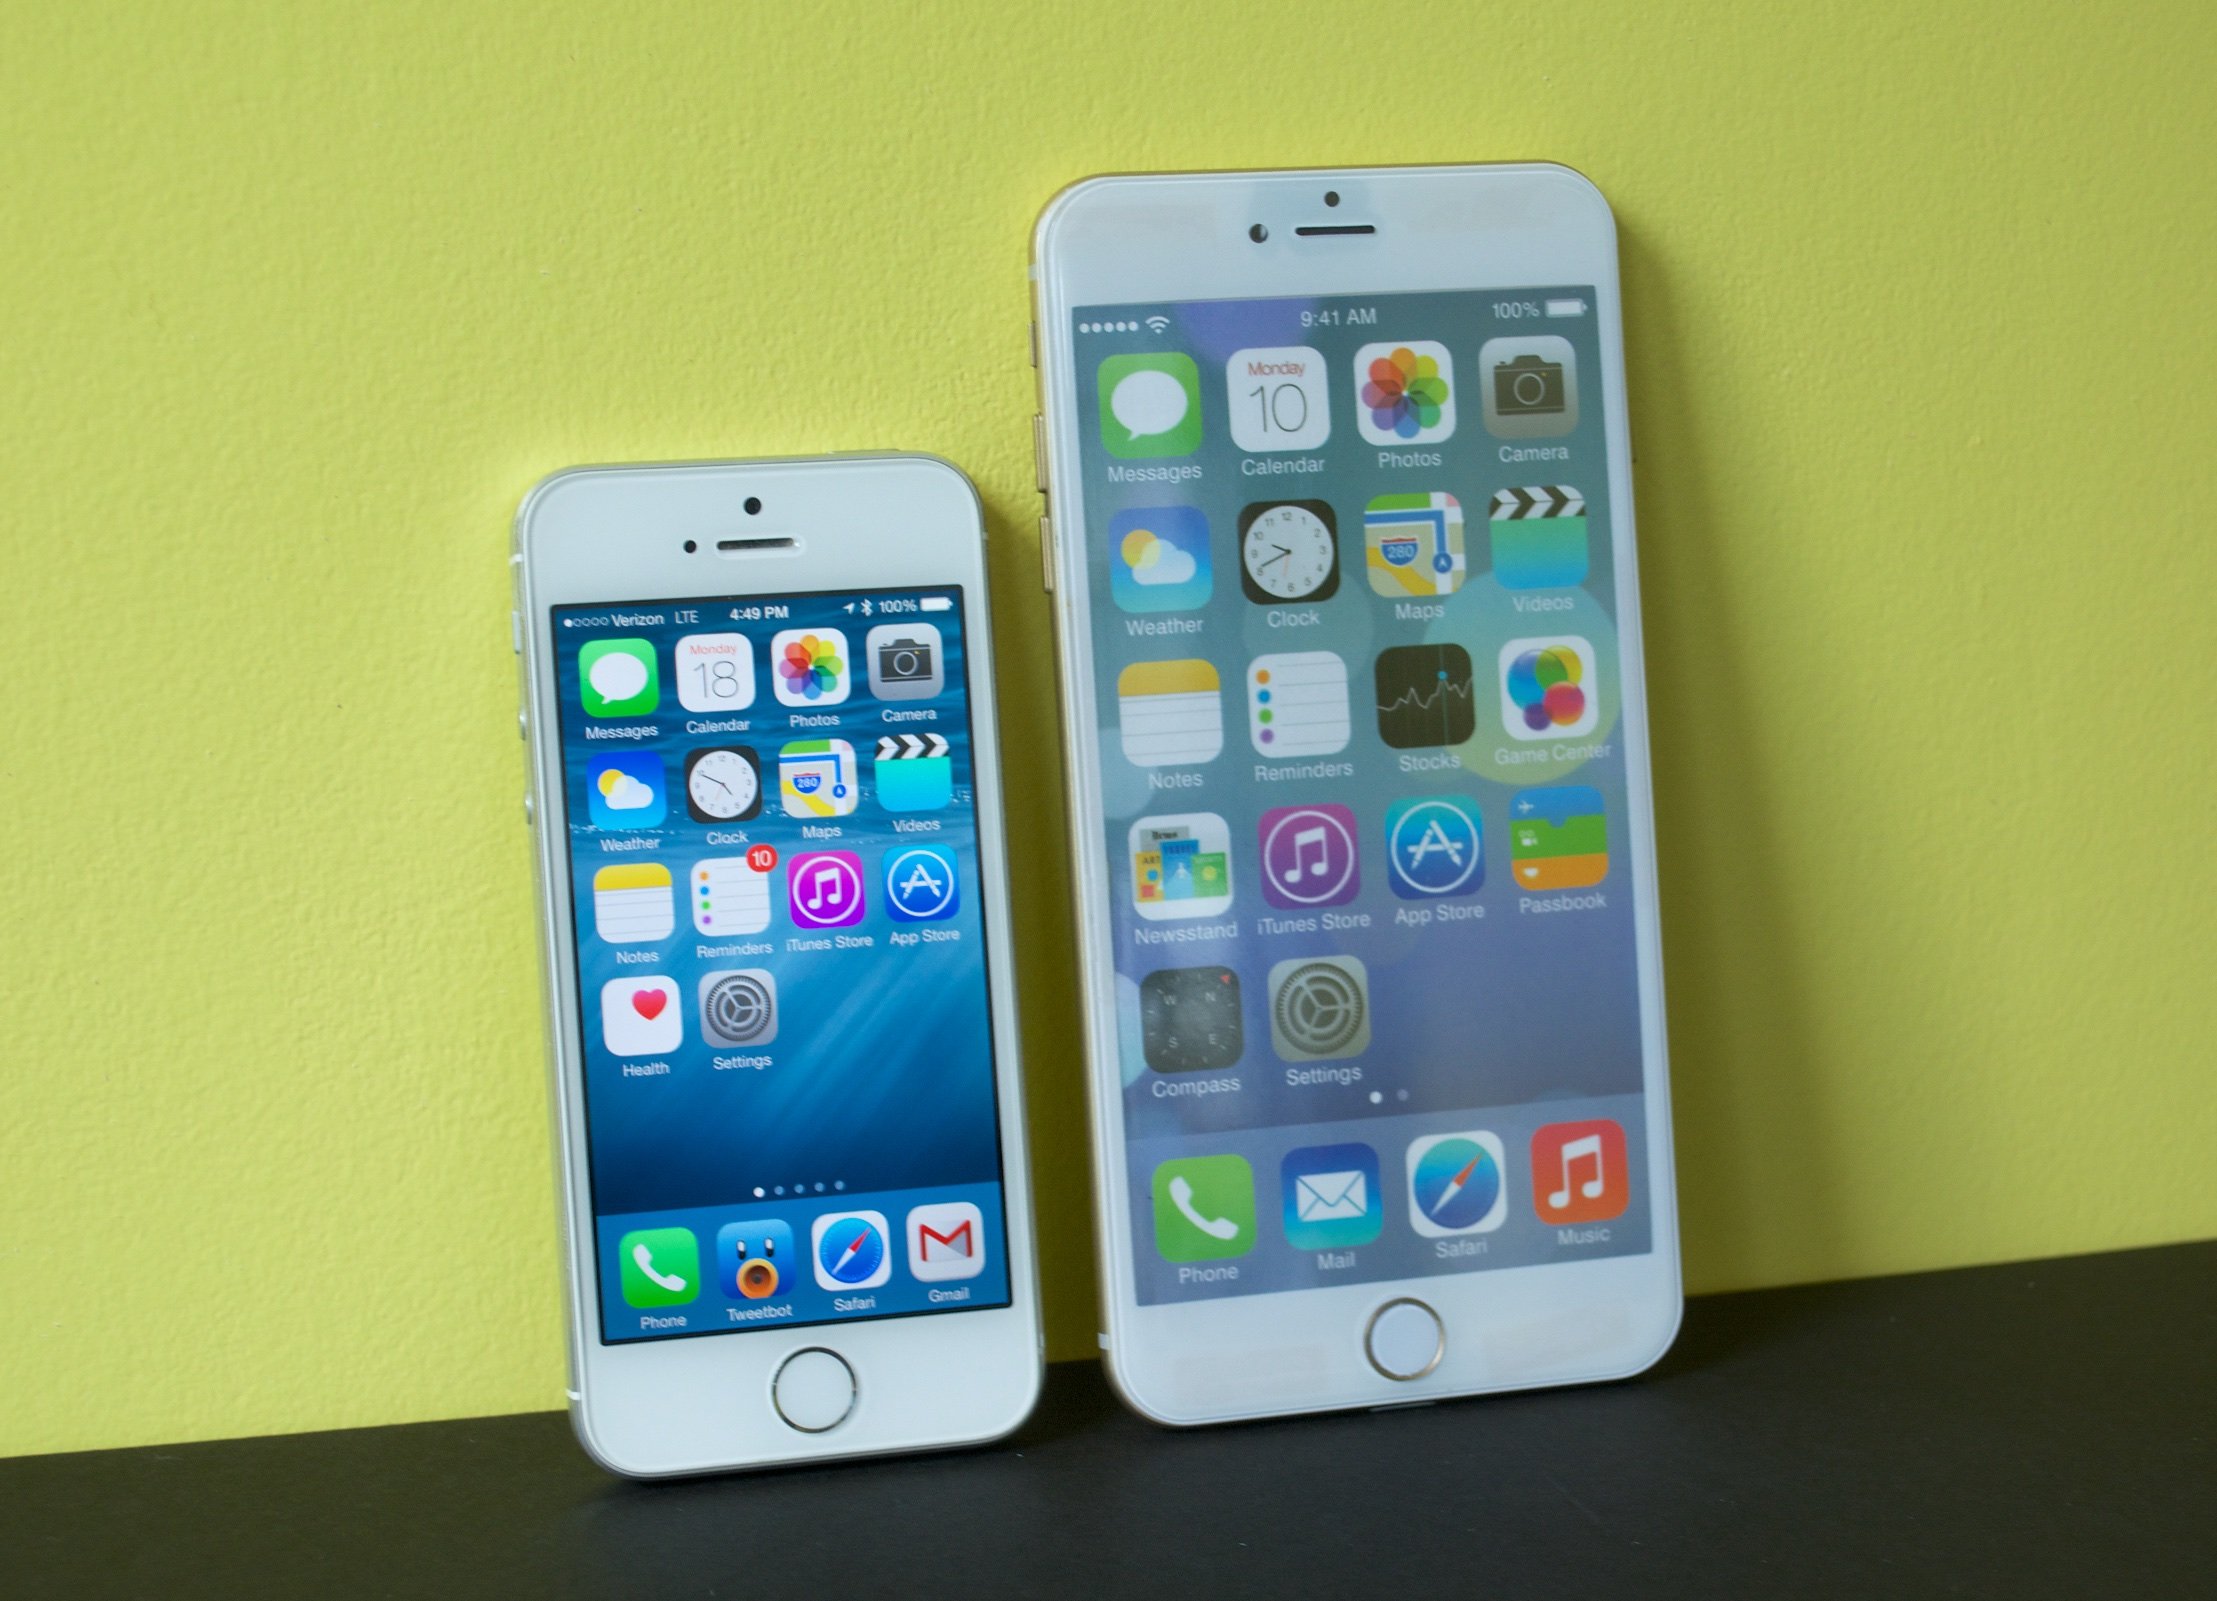 iPhone 6 vs iPhone 5s: 5 Things Know About the Big iPhone